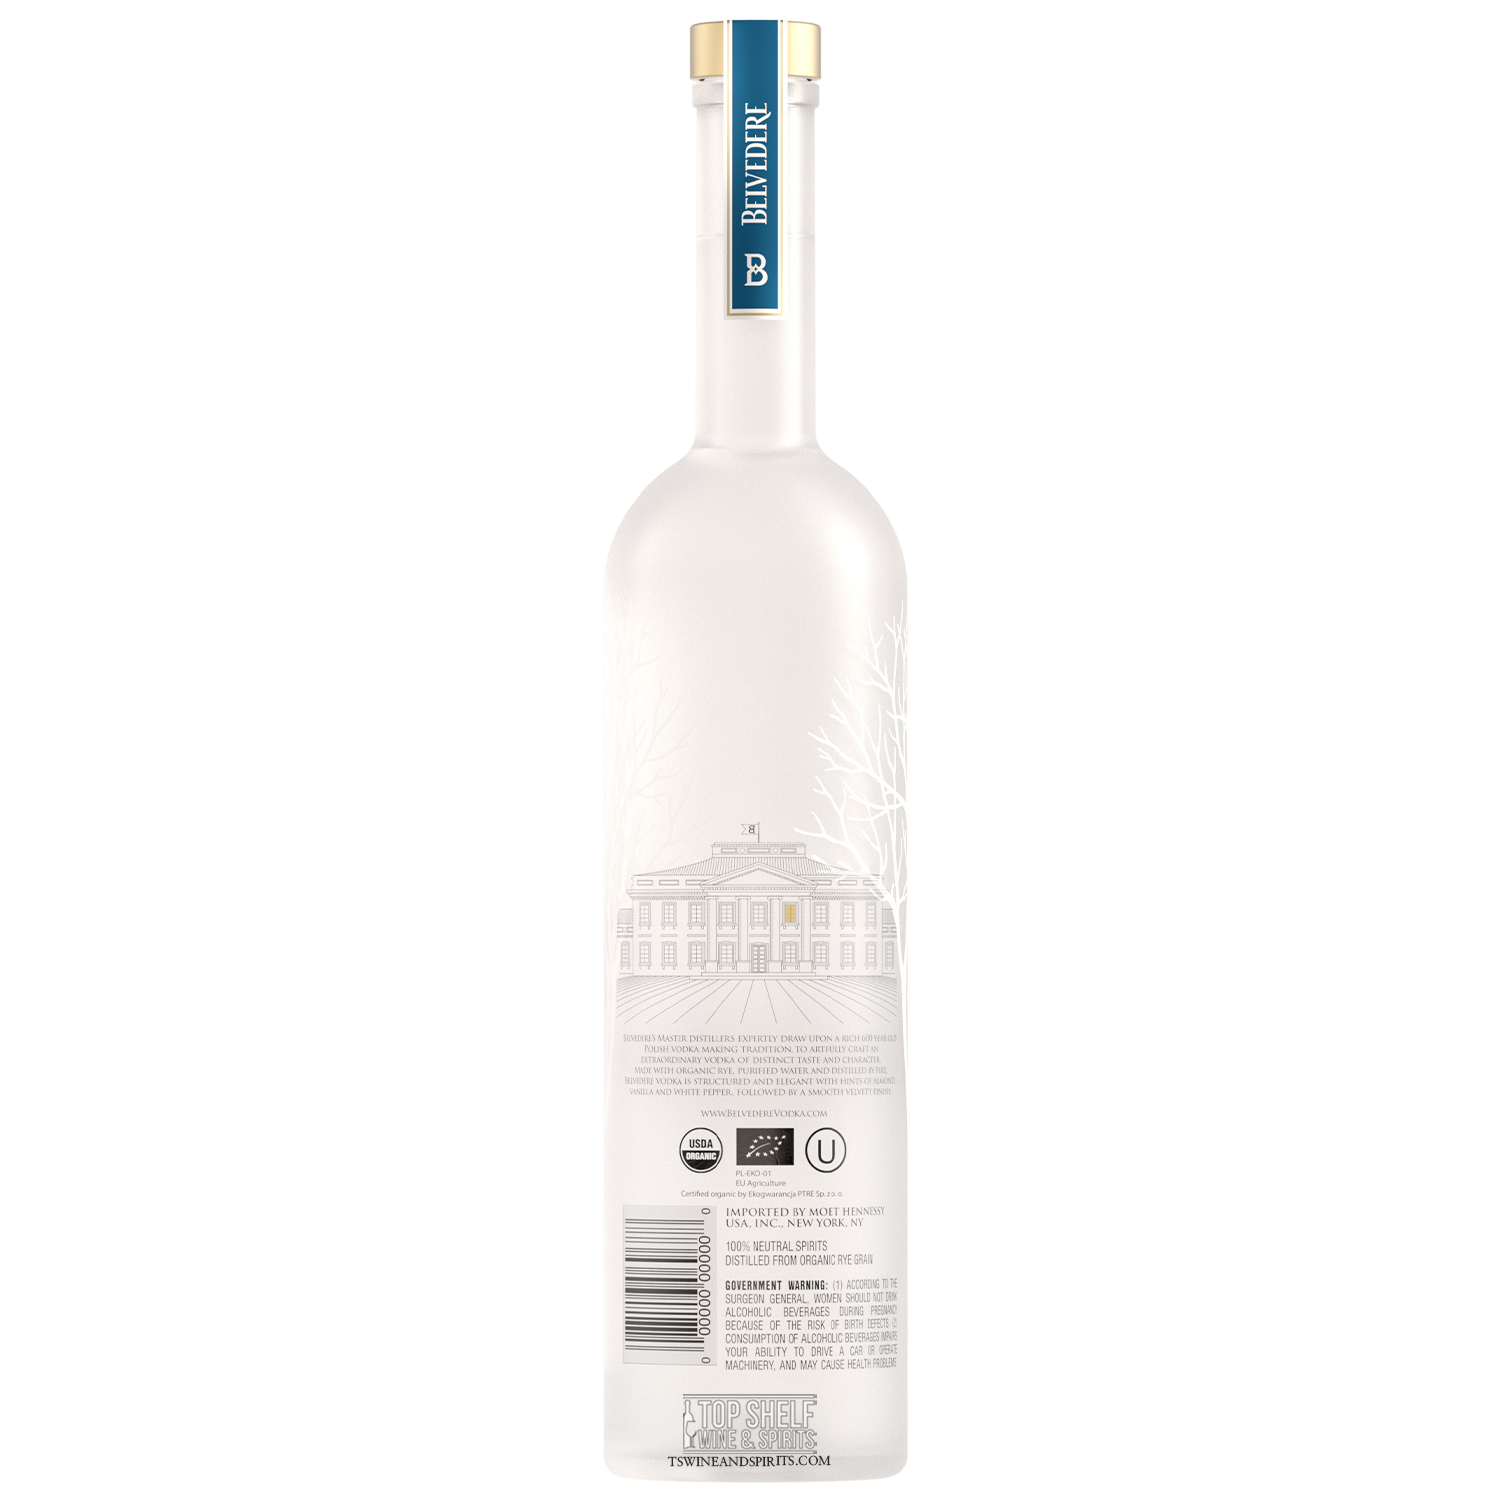 Belvedere Organic Vodka| Delivery & Gifting (Engraving Available)